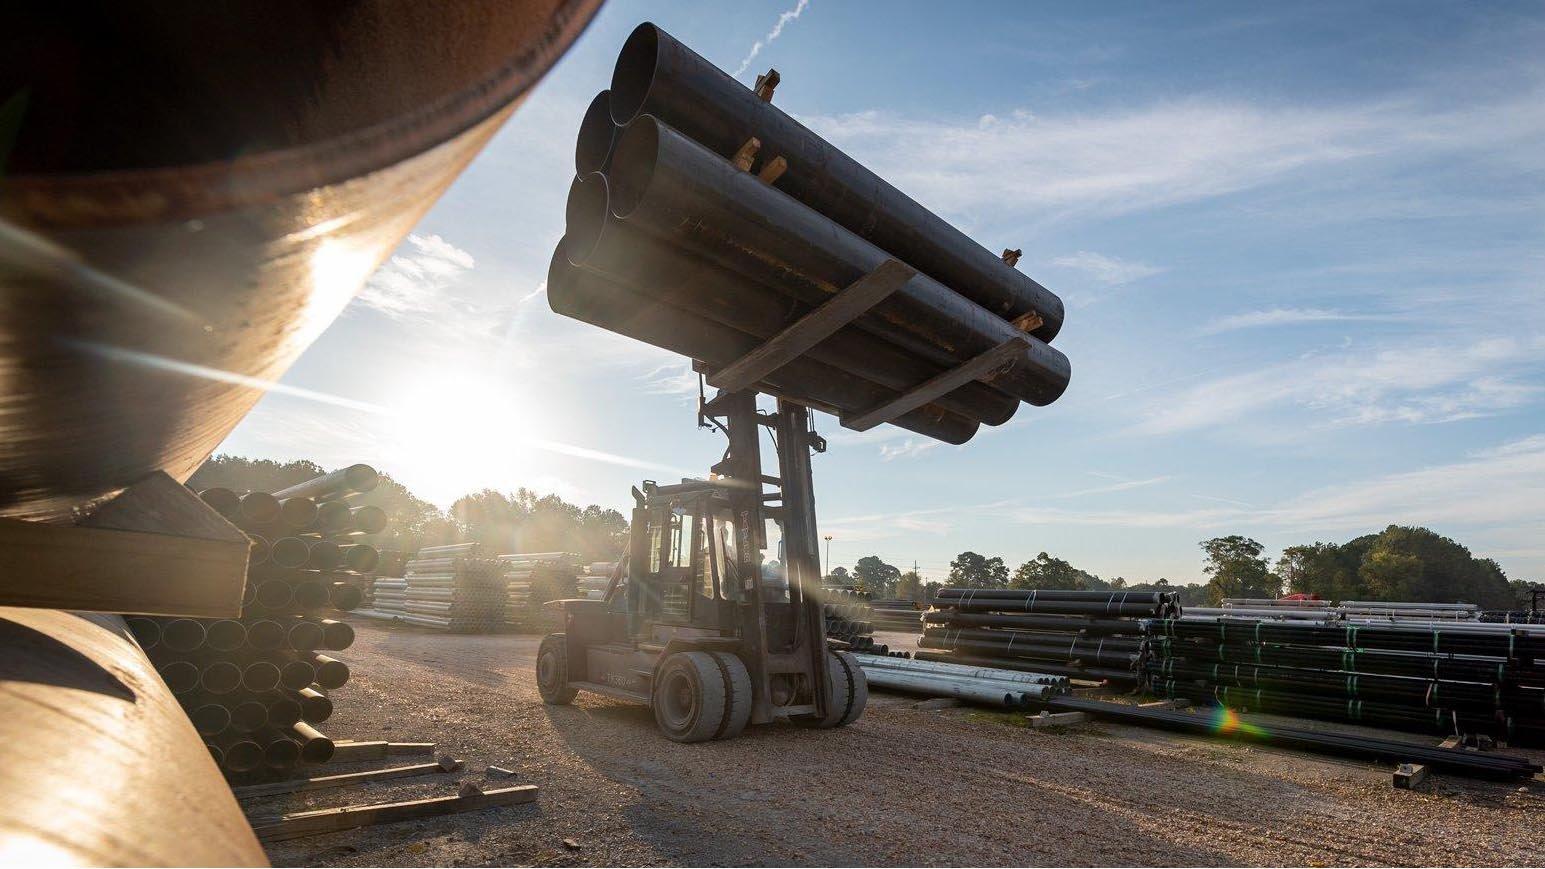 A construction forklift hauls a stack of large industrial pipe at a jobsite.